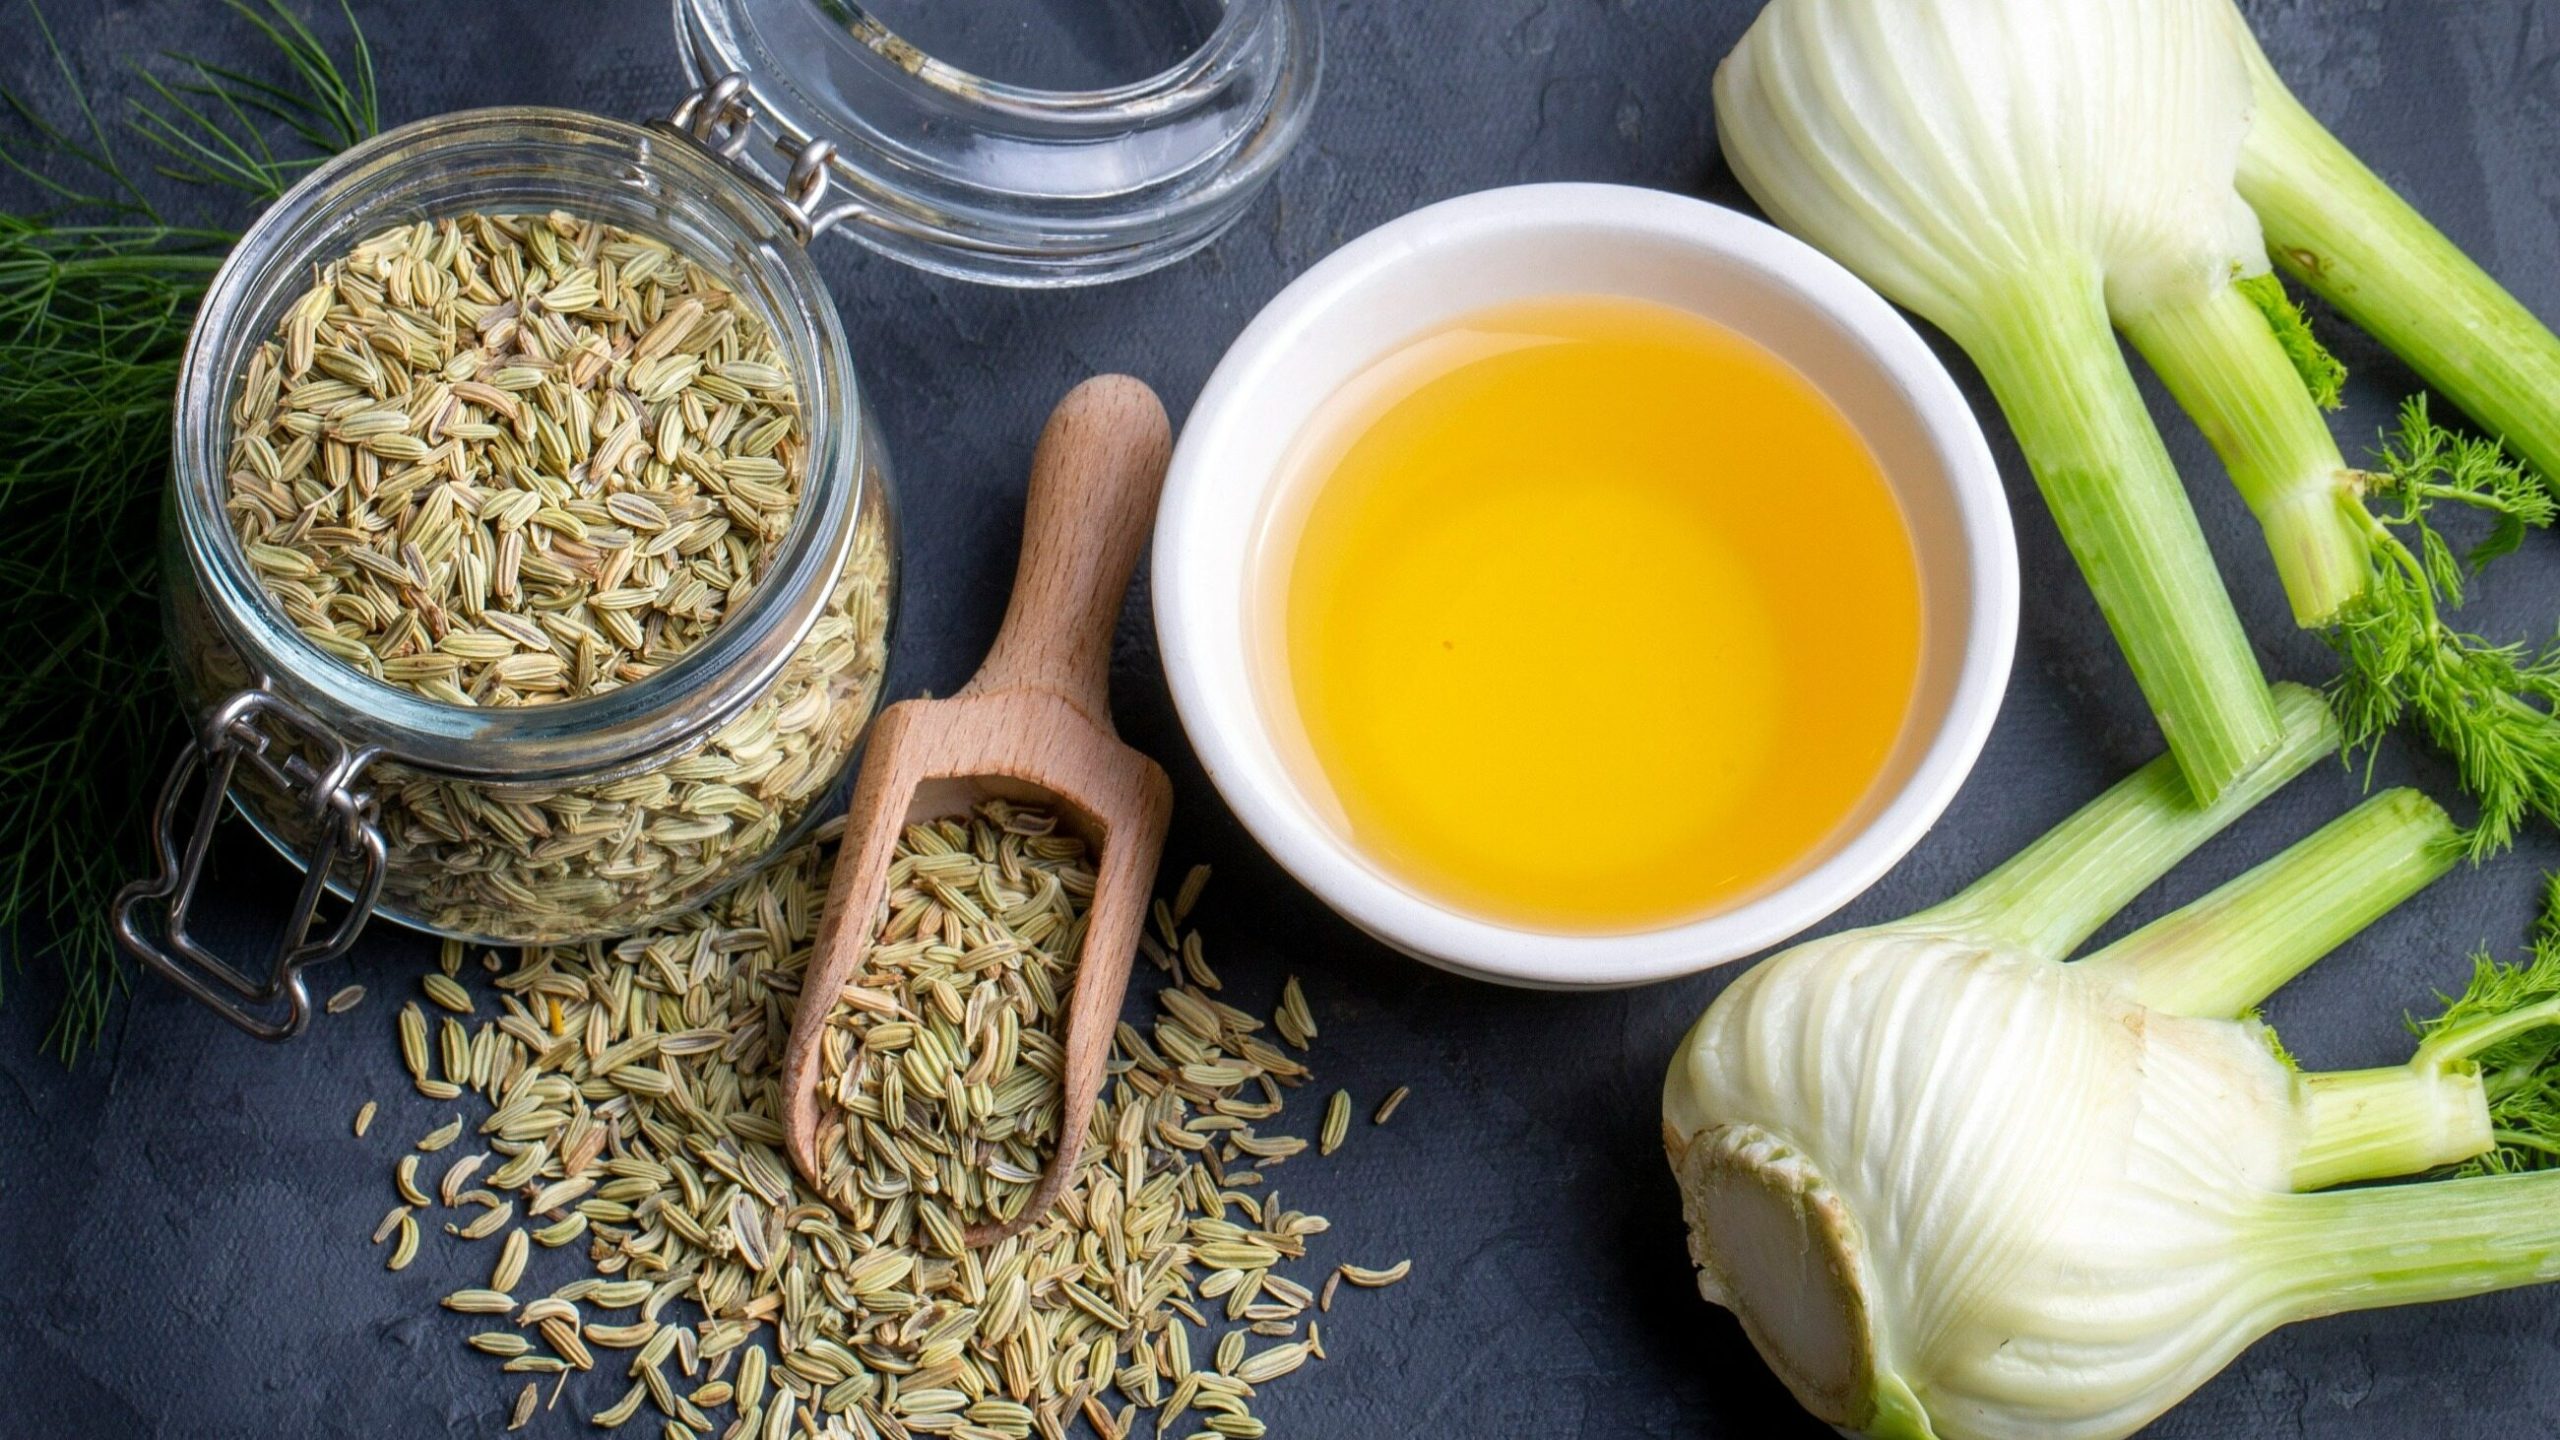 Fennel has valuable properties and medicinal uses.  See what it helps and how to dose it